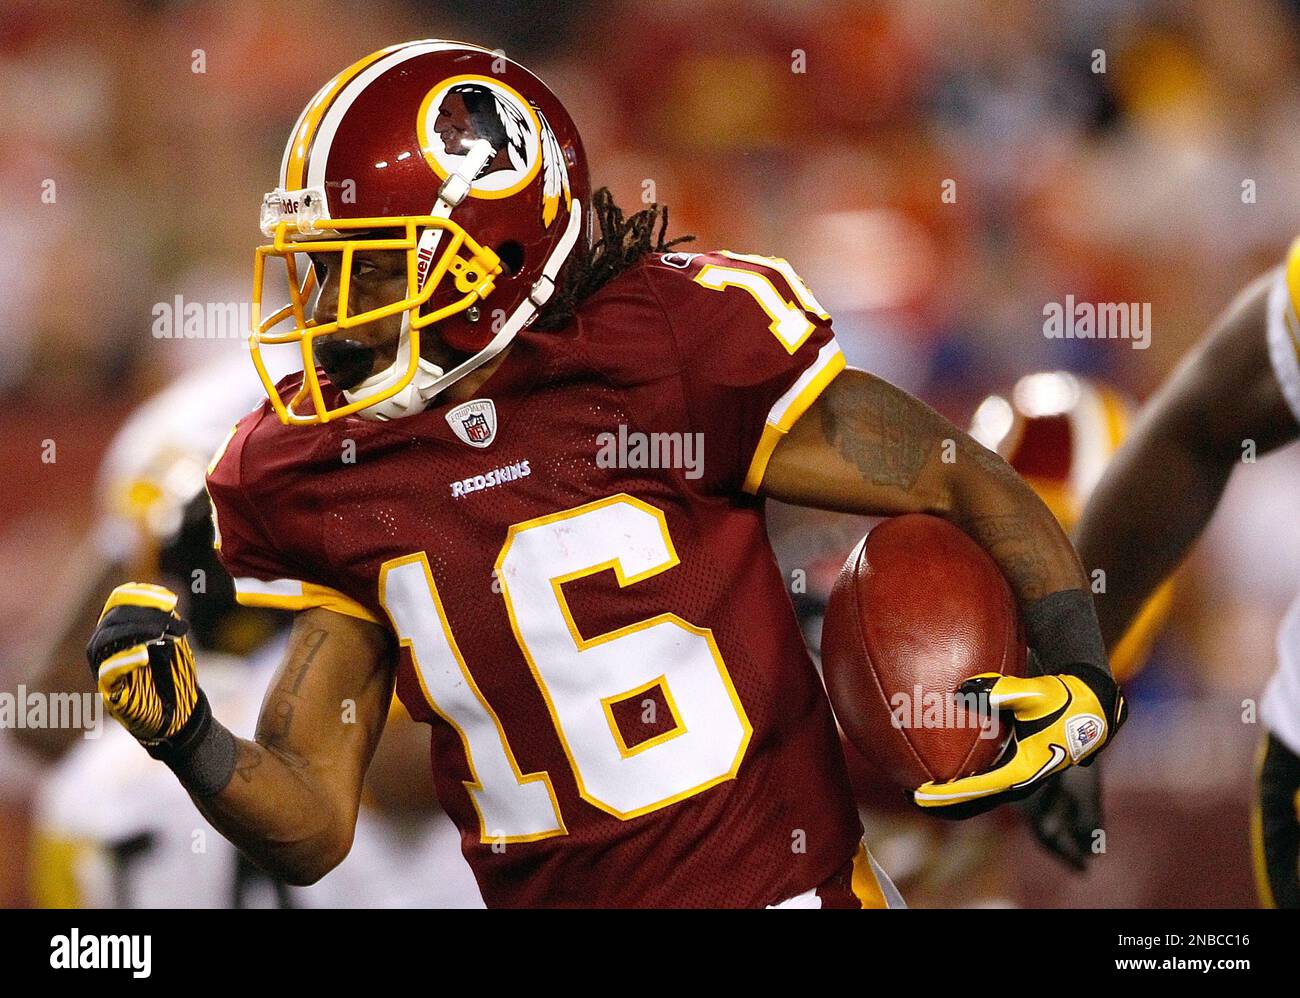 Washington Redskins wide receiver Brandon Banks carries the ball during the  first half of an NFL preseason football game against the Pittsburgh  Steelers in Landover, Md., on Friday, Aug. 12, 2011. (AP